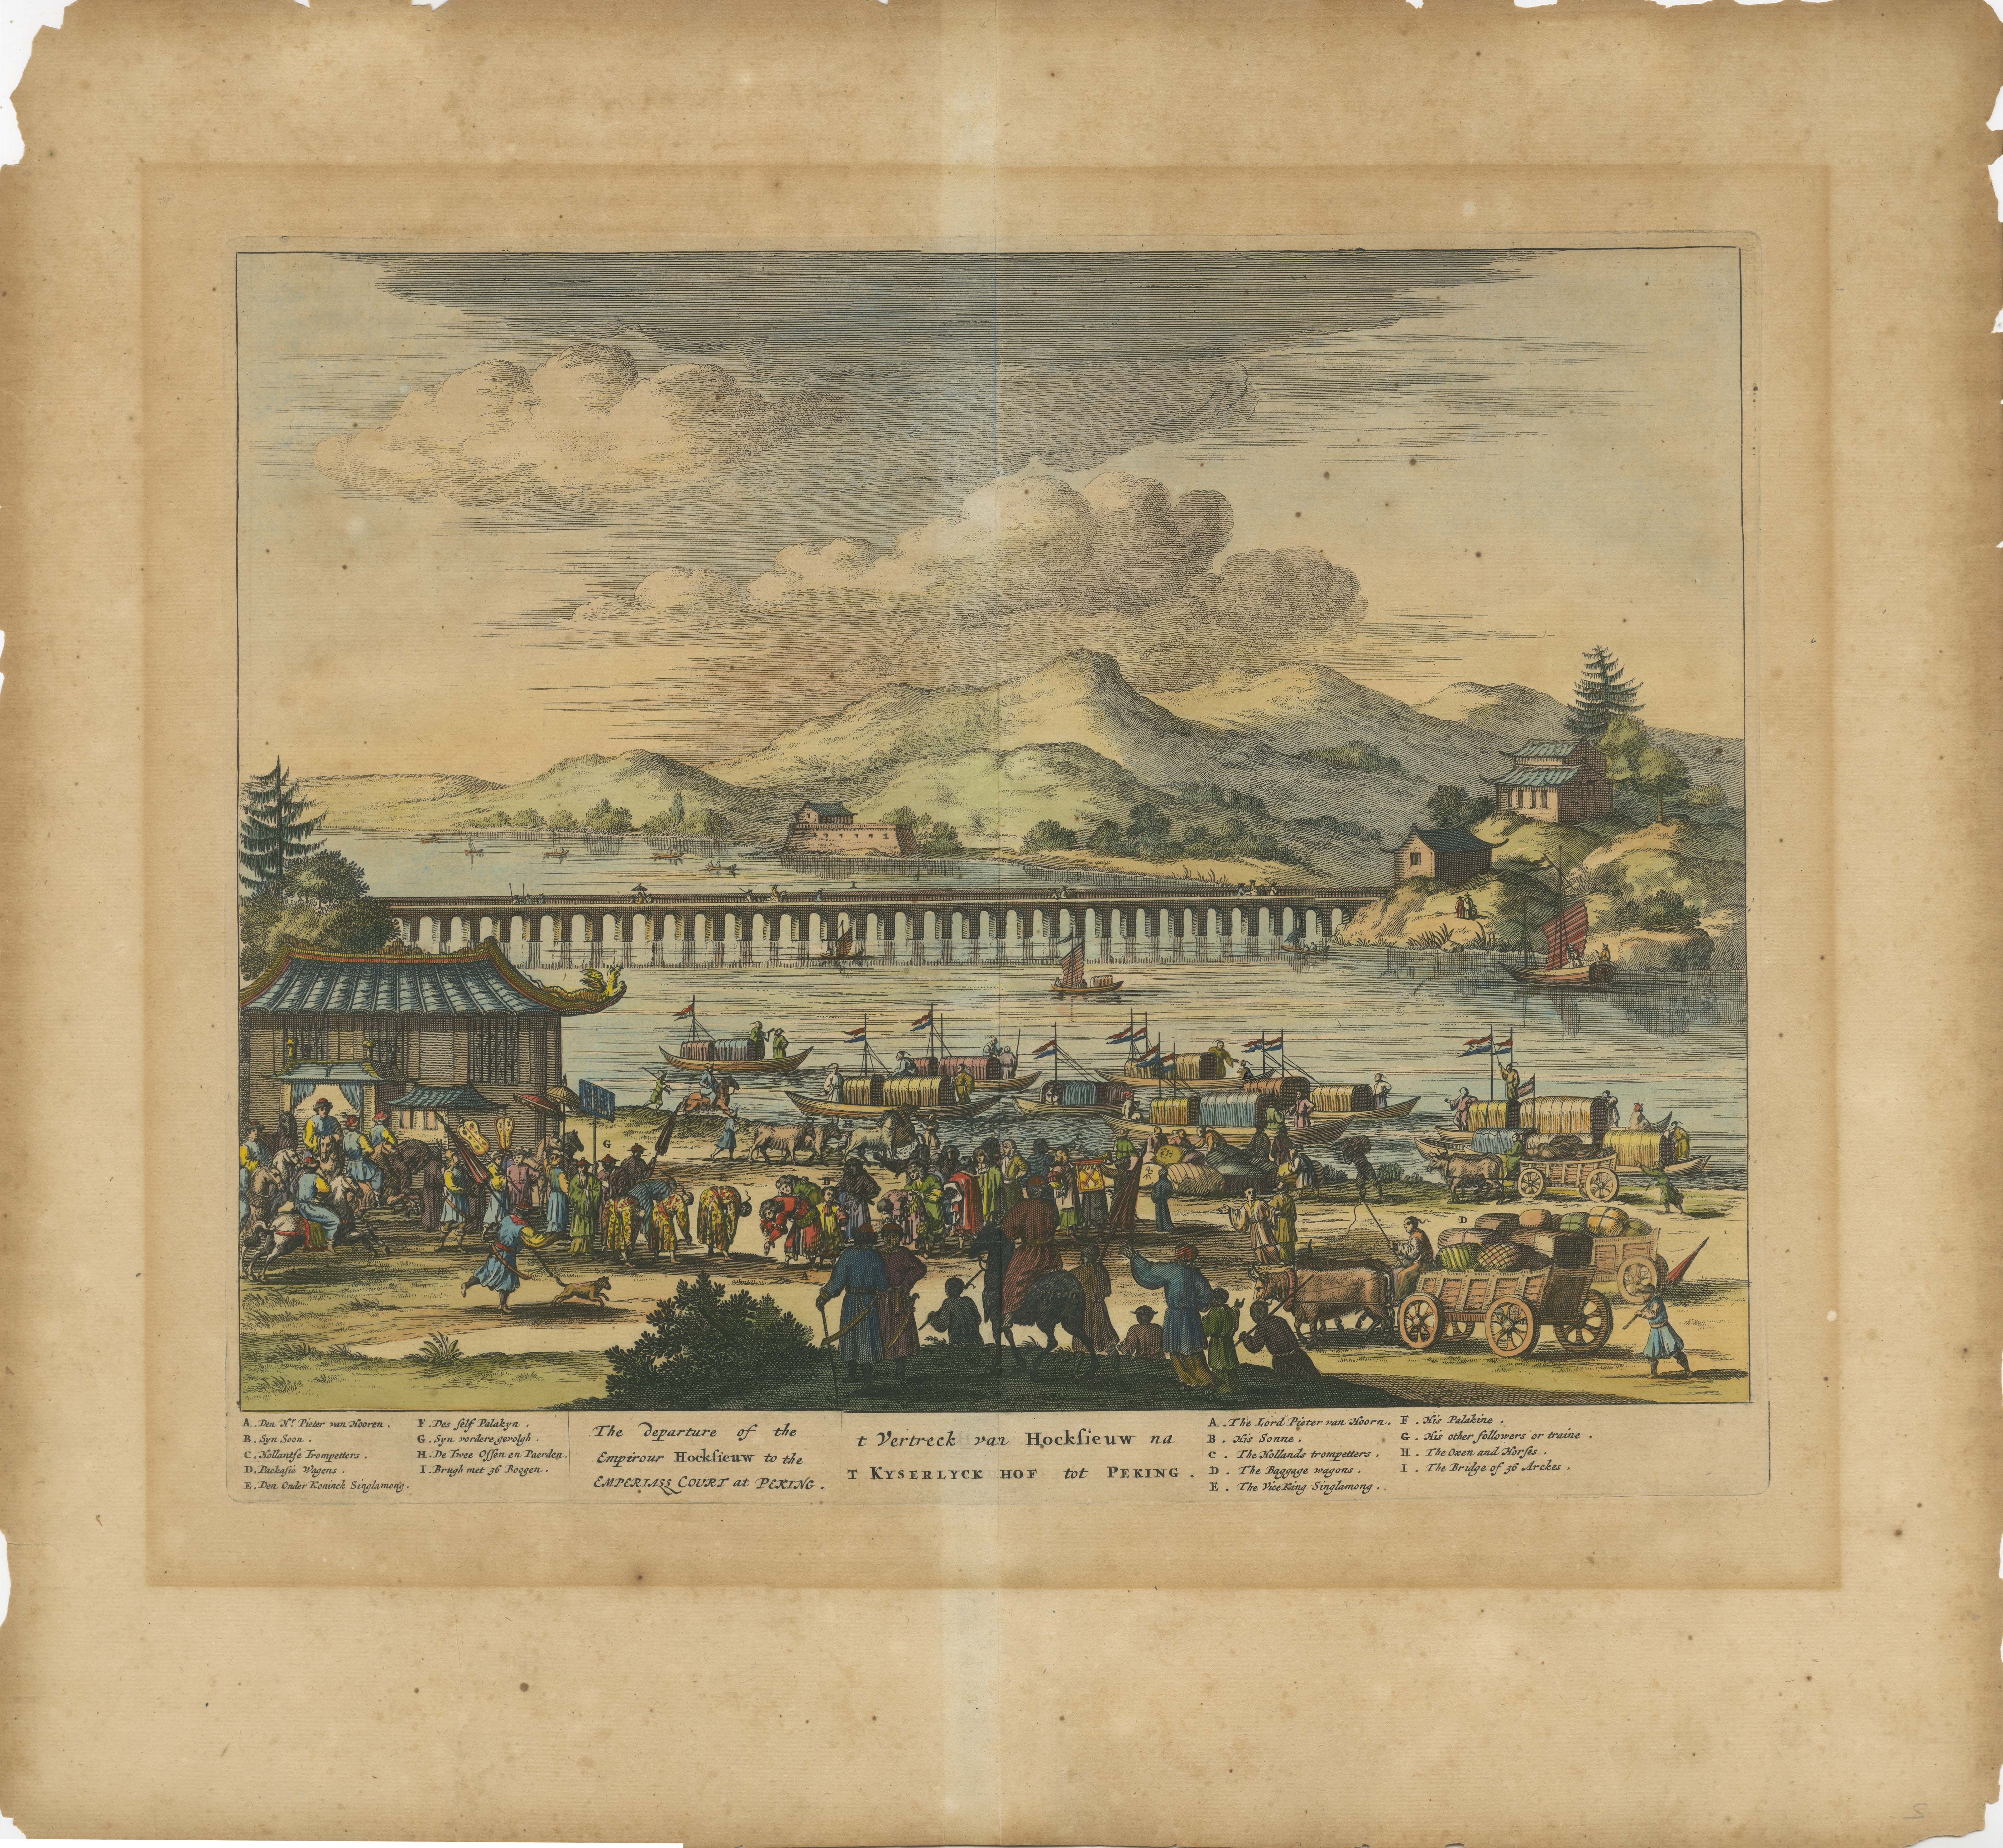 Title: 'The departure of the Empirour Hockflieuw to the Emprial Court at Peking' with further description in Dutch. 

The Dutch man Pieter van Hoorn, his son, trompetters and futher entourage are visiting China. 

Creator: Montanus, Arnoldus,